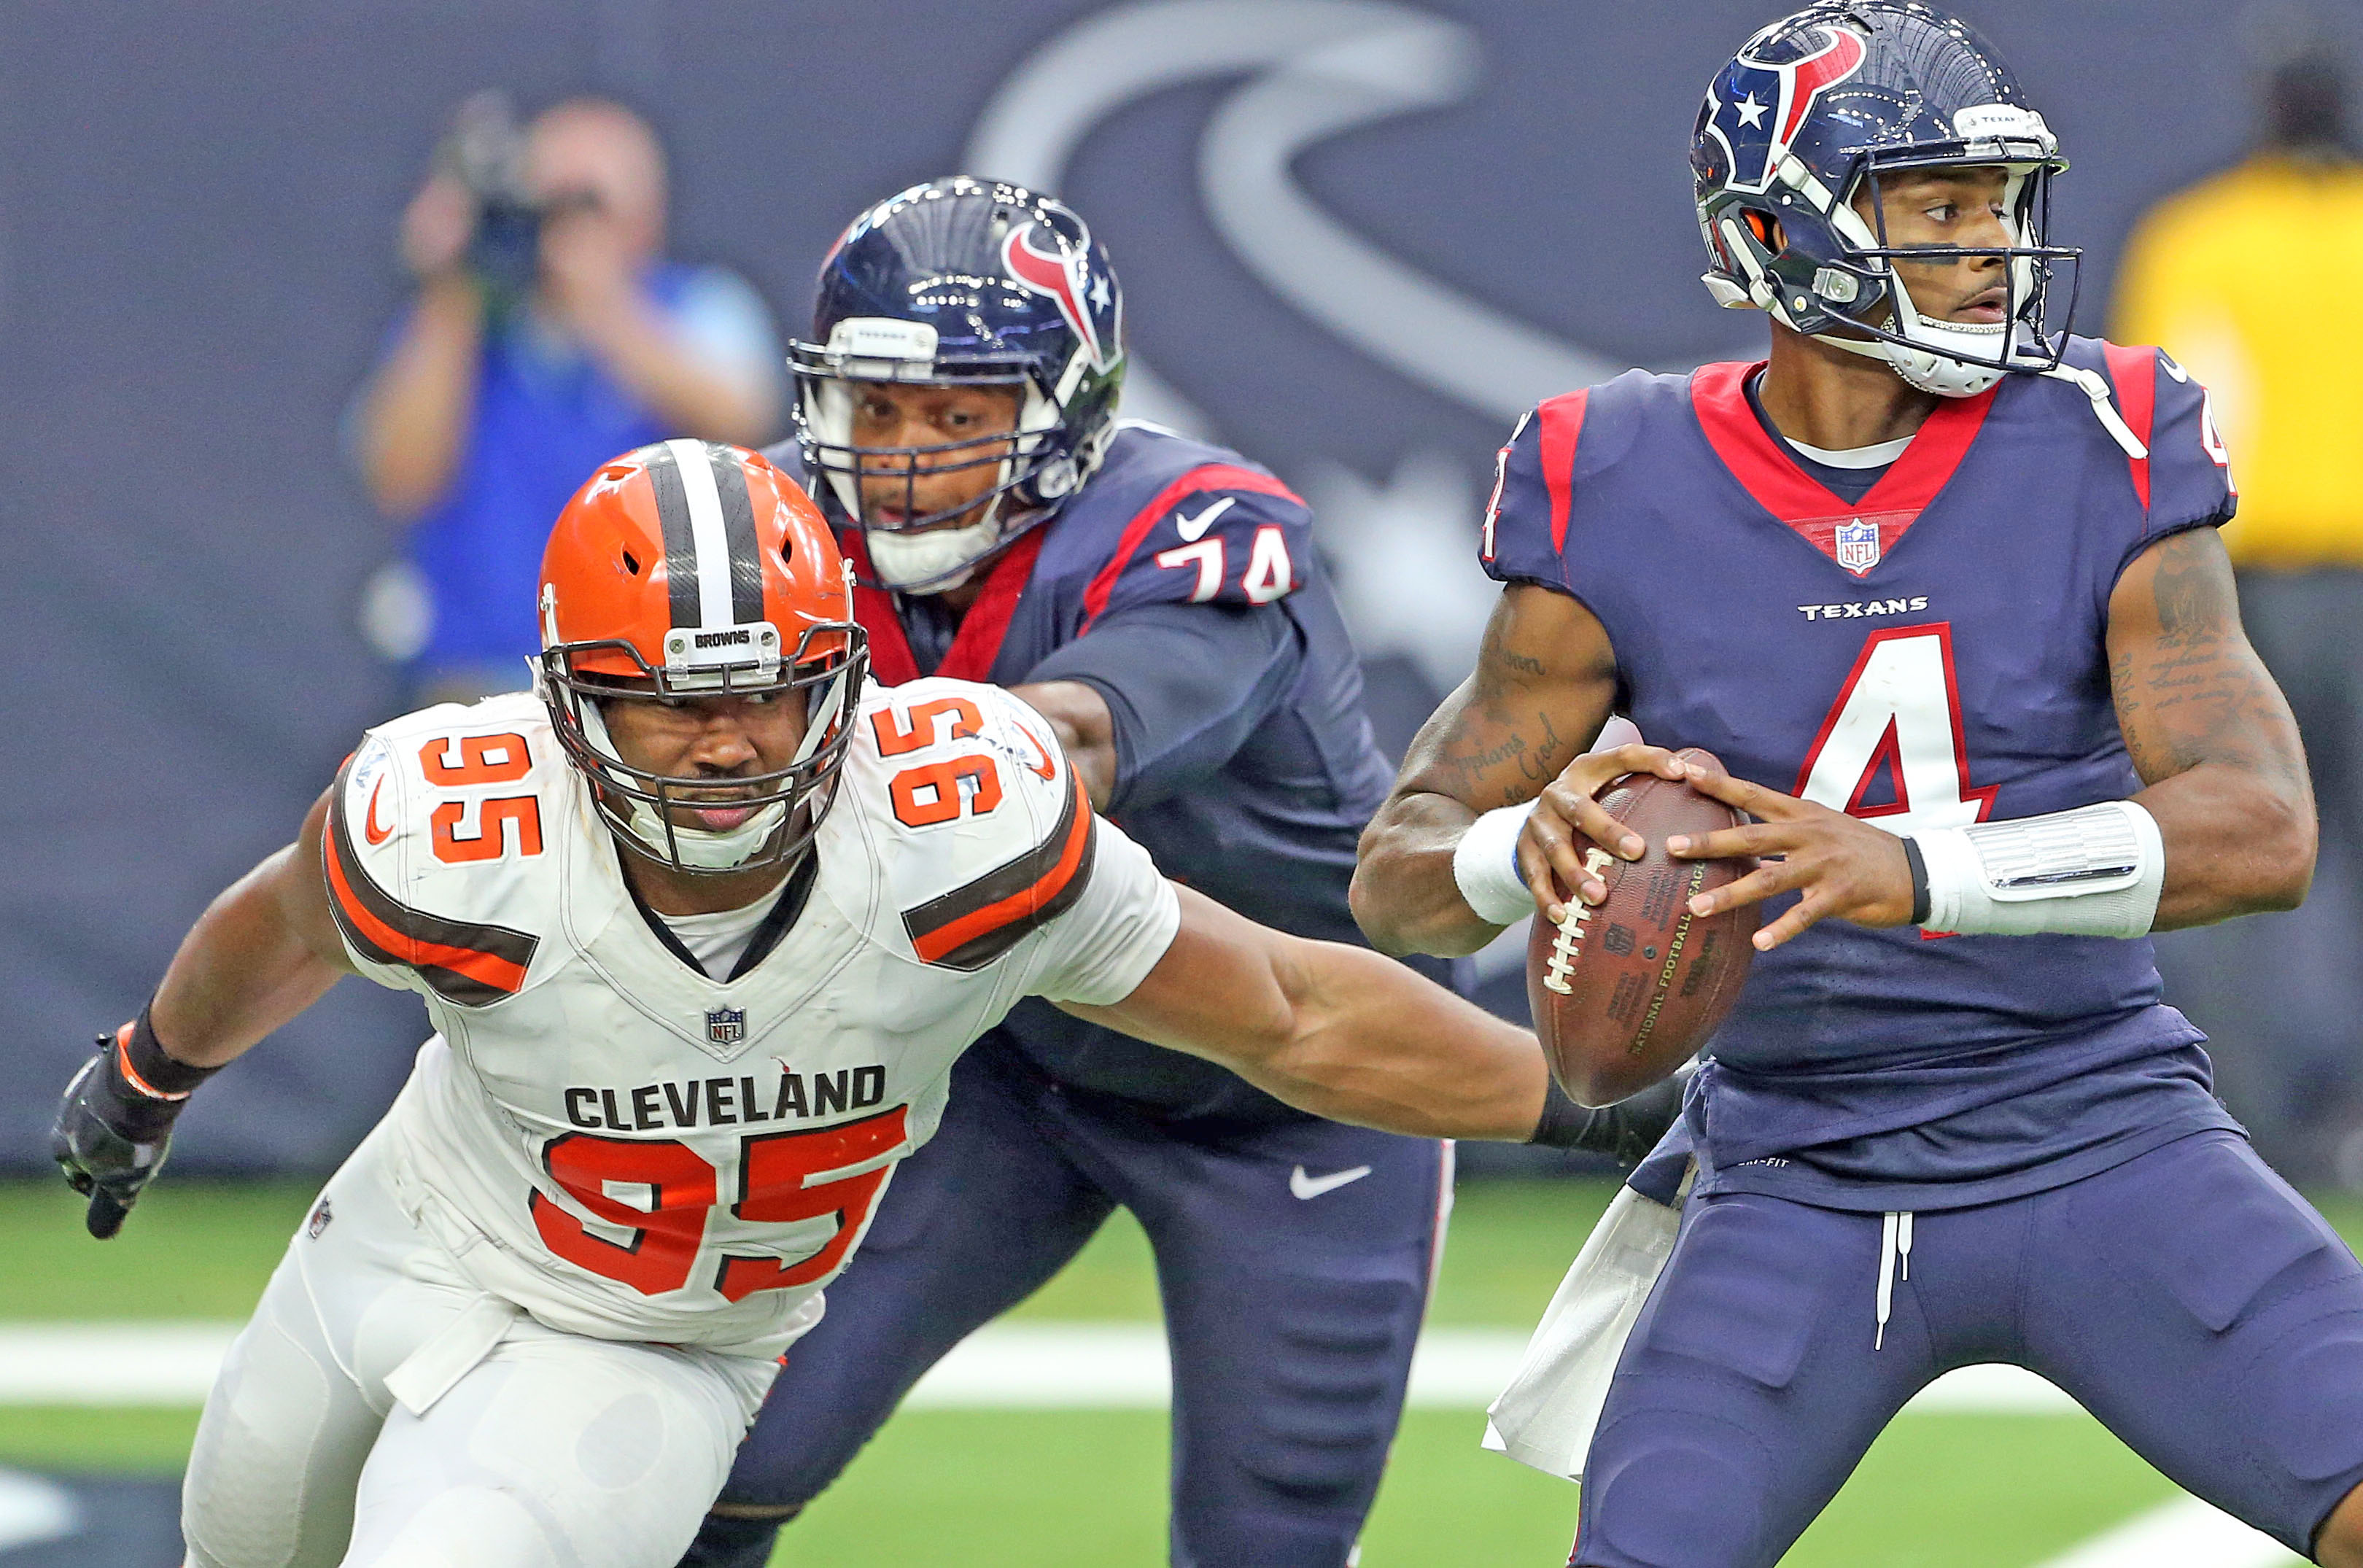 cleveland browns at houston texans